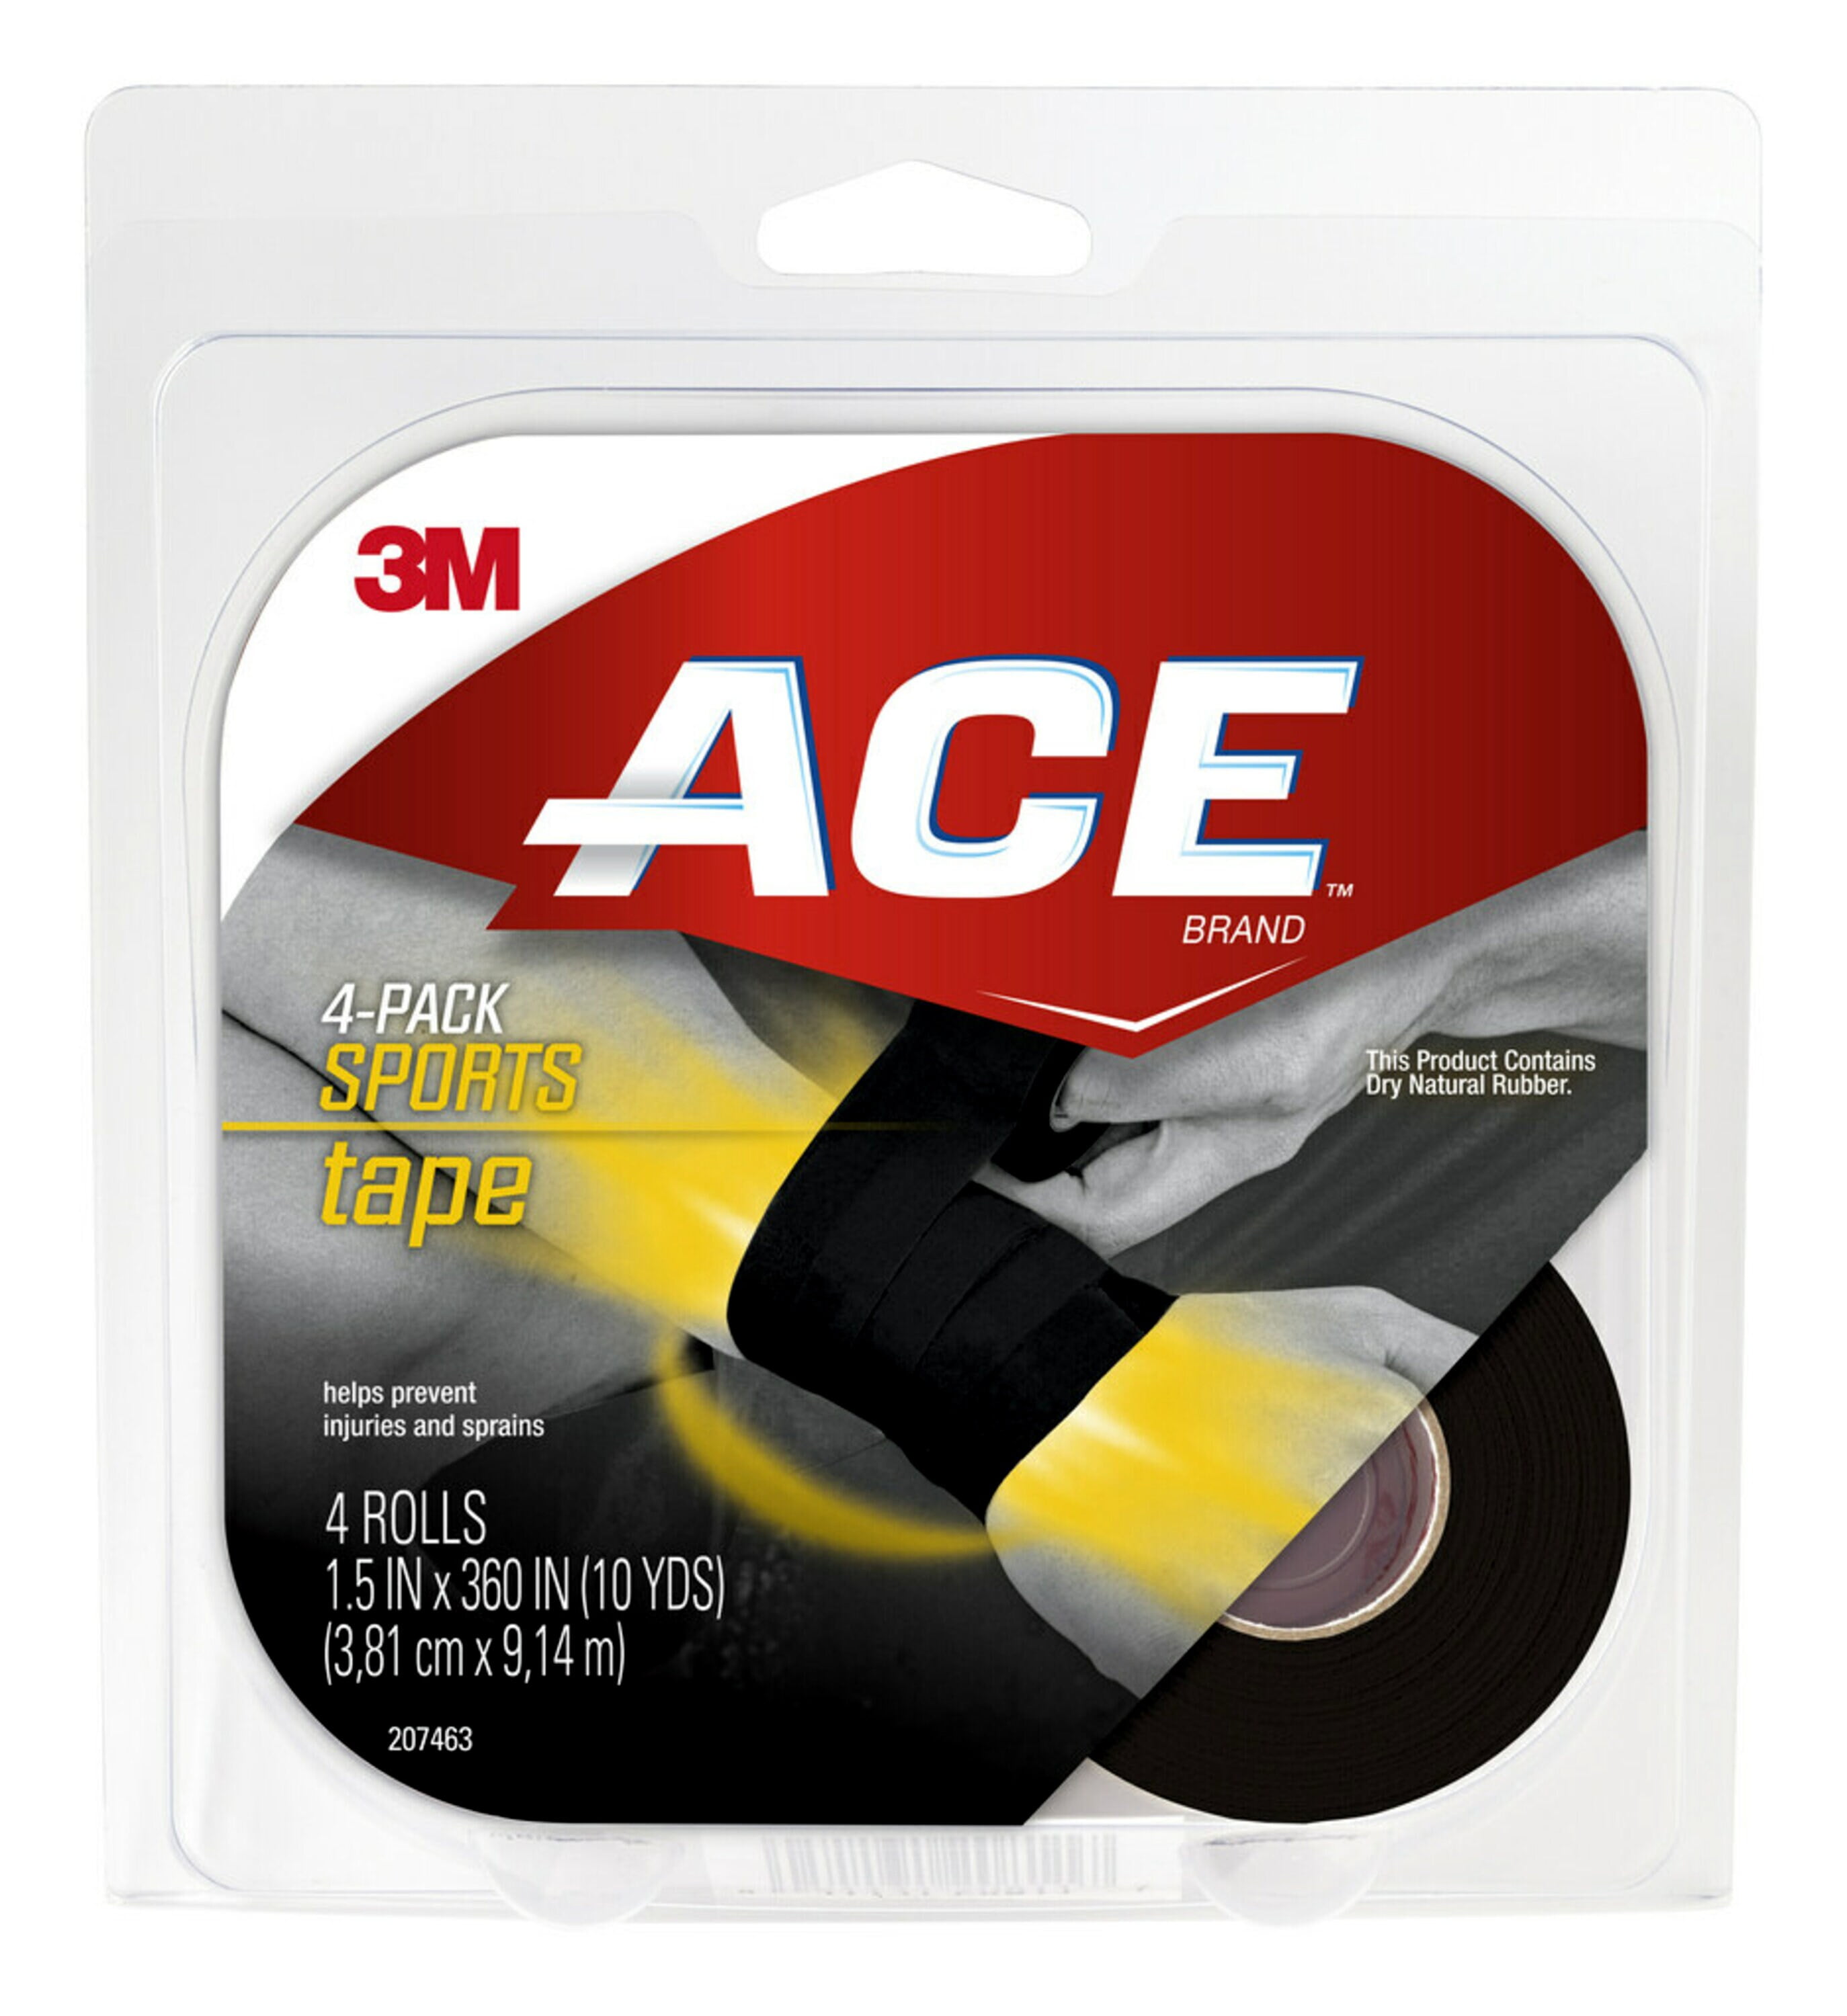 ACE Brand Sports Tape, Firm, Supportive Comfort, Black, 1.5 x 360, 4 Rolls